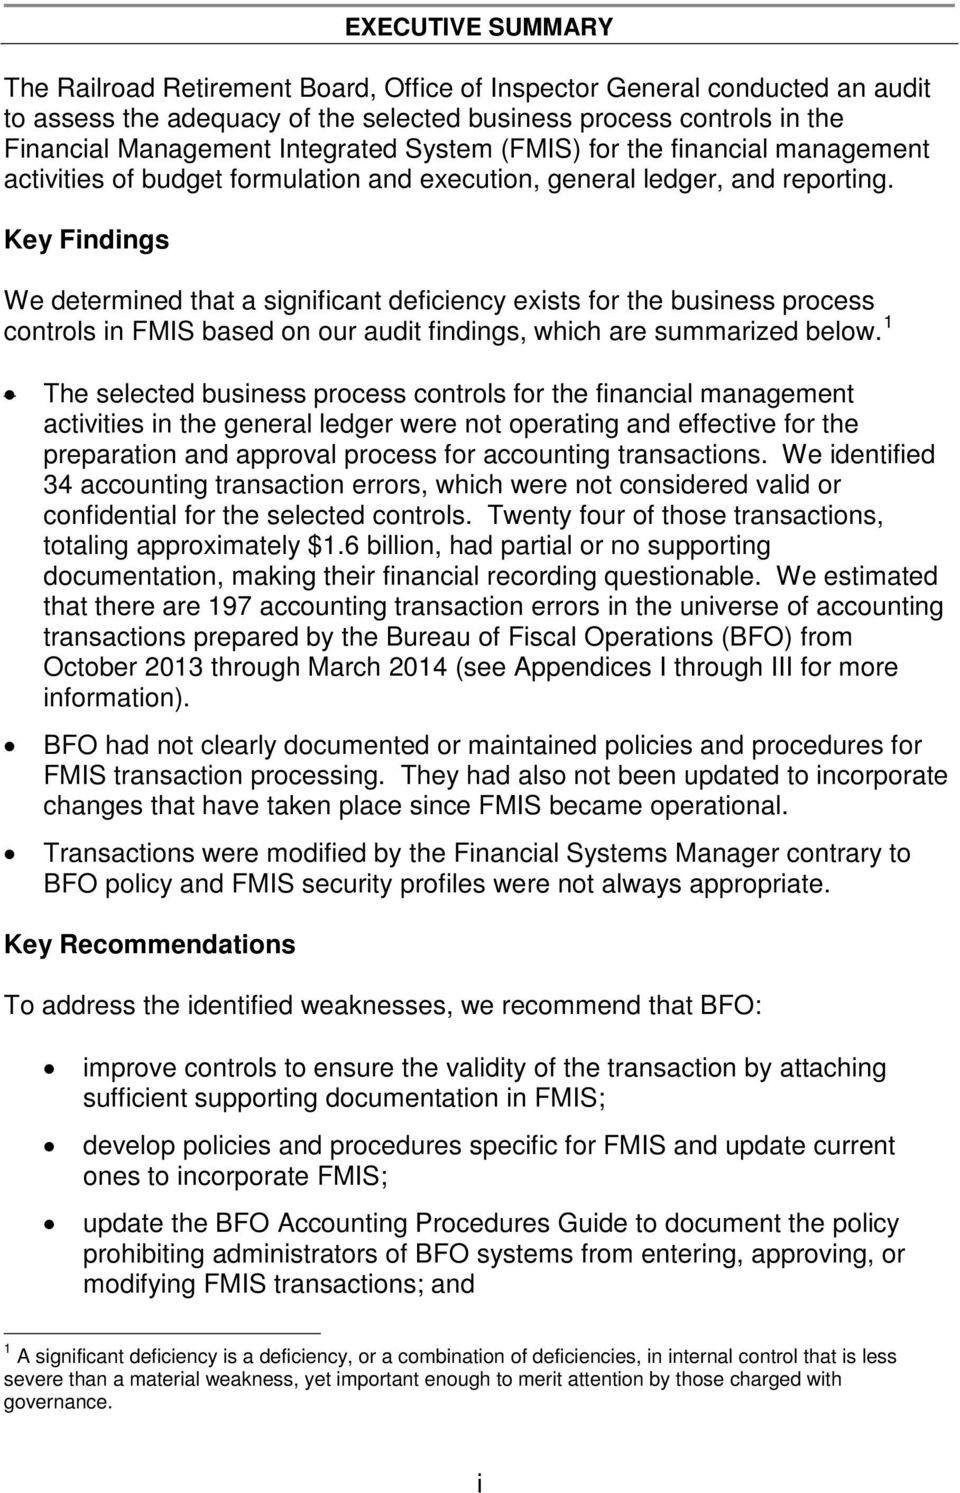 Key Findings We determined that a significant deficiency exists for the business process controls in FMIS based on our audit findings, which are summarized below.